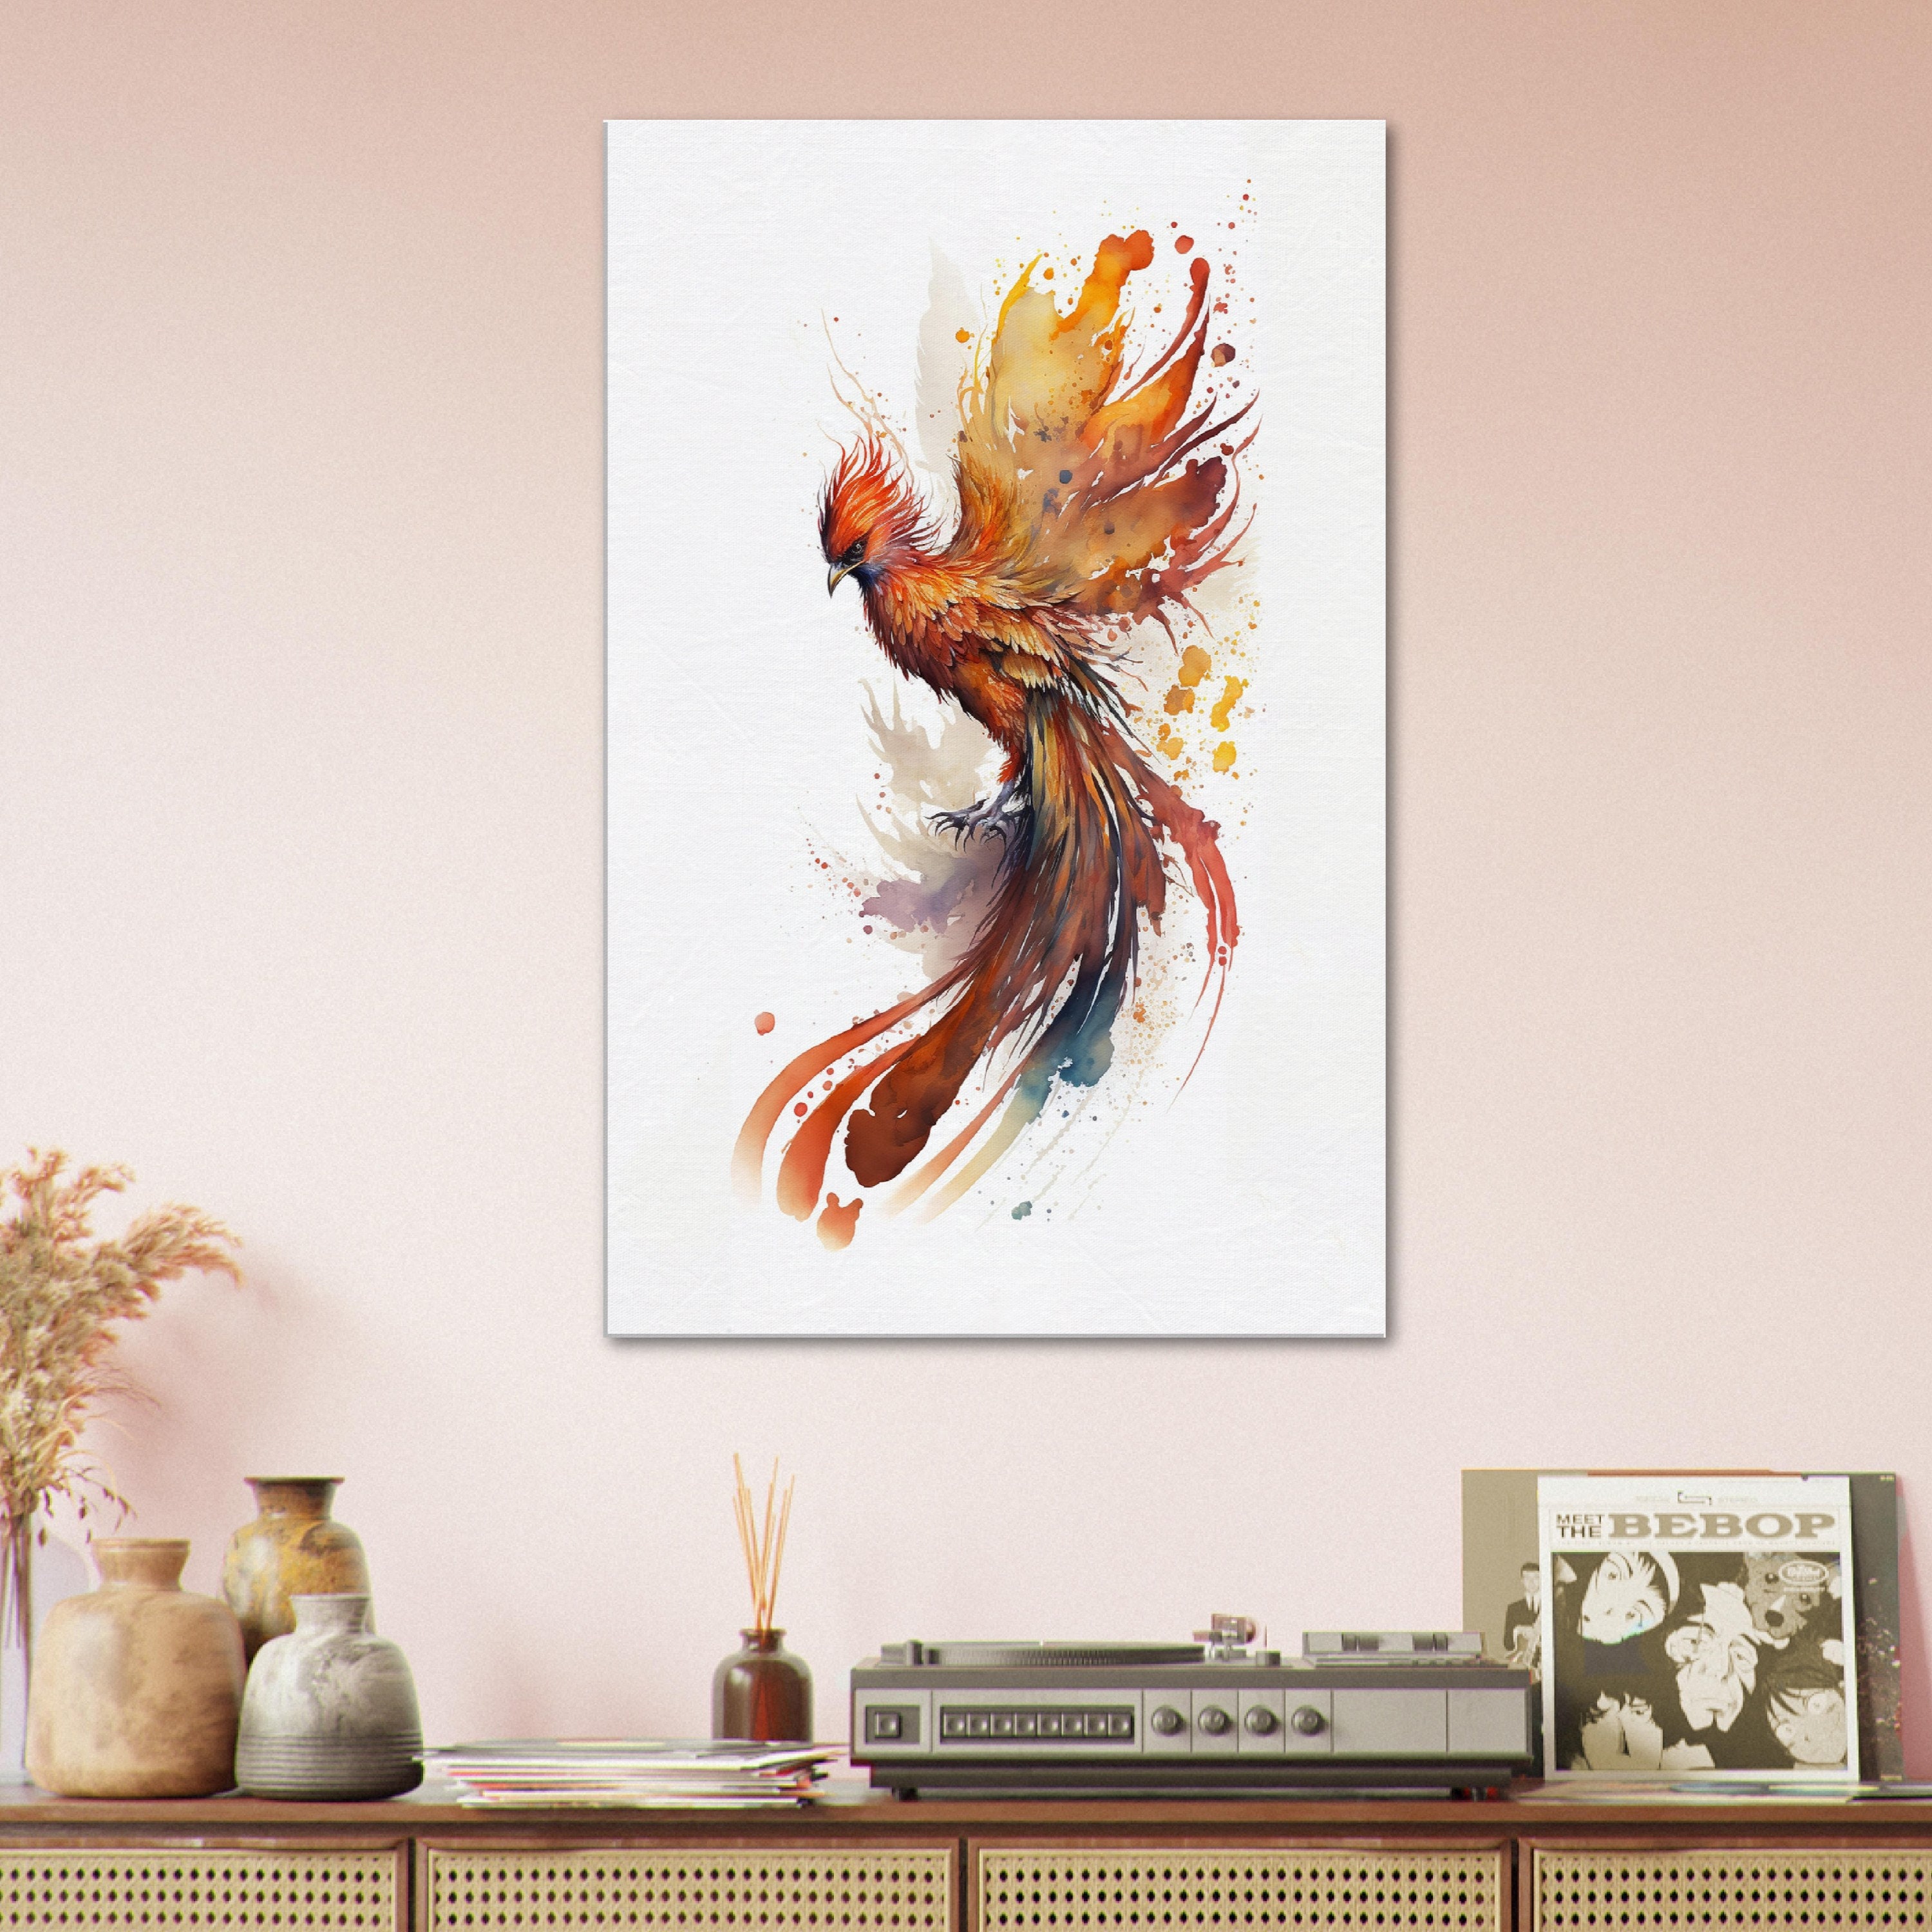  PHOENIX Watercolor Stretched Canvases, 10x10 Inch/4